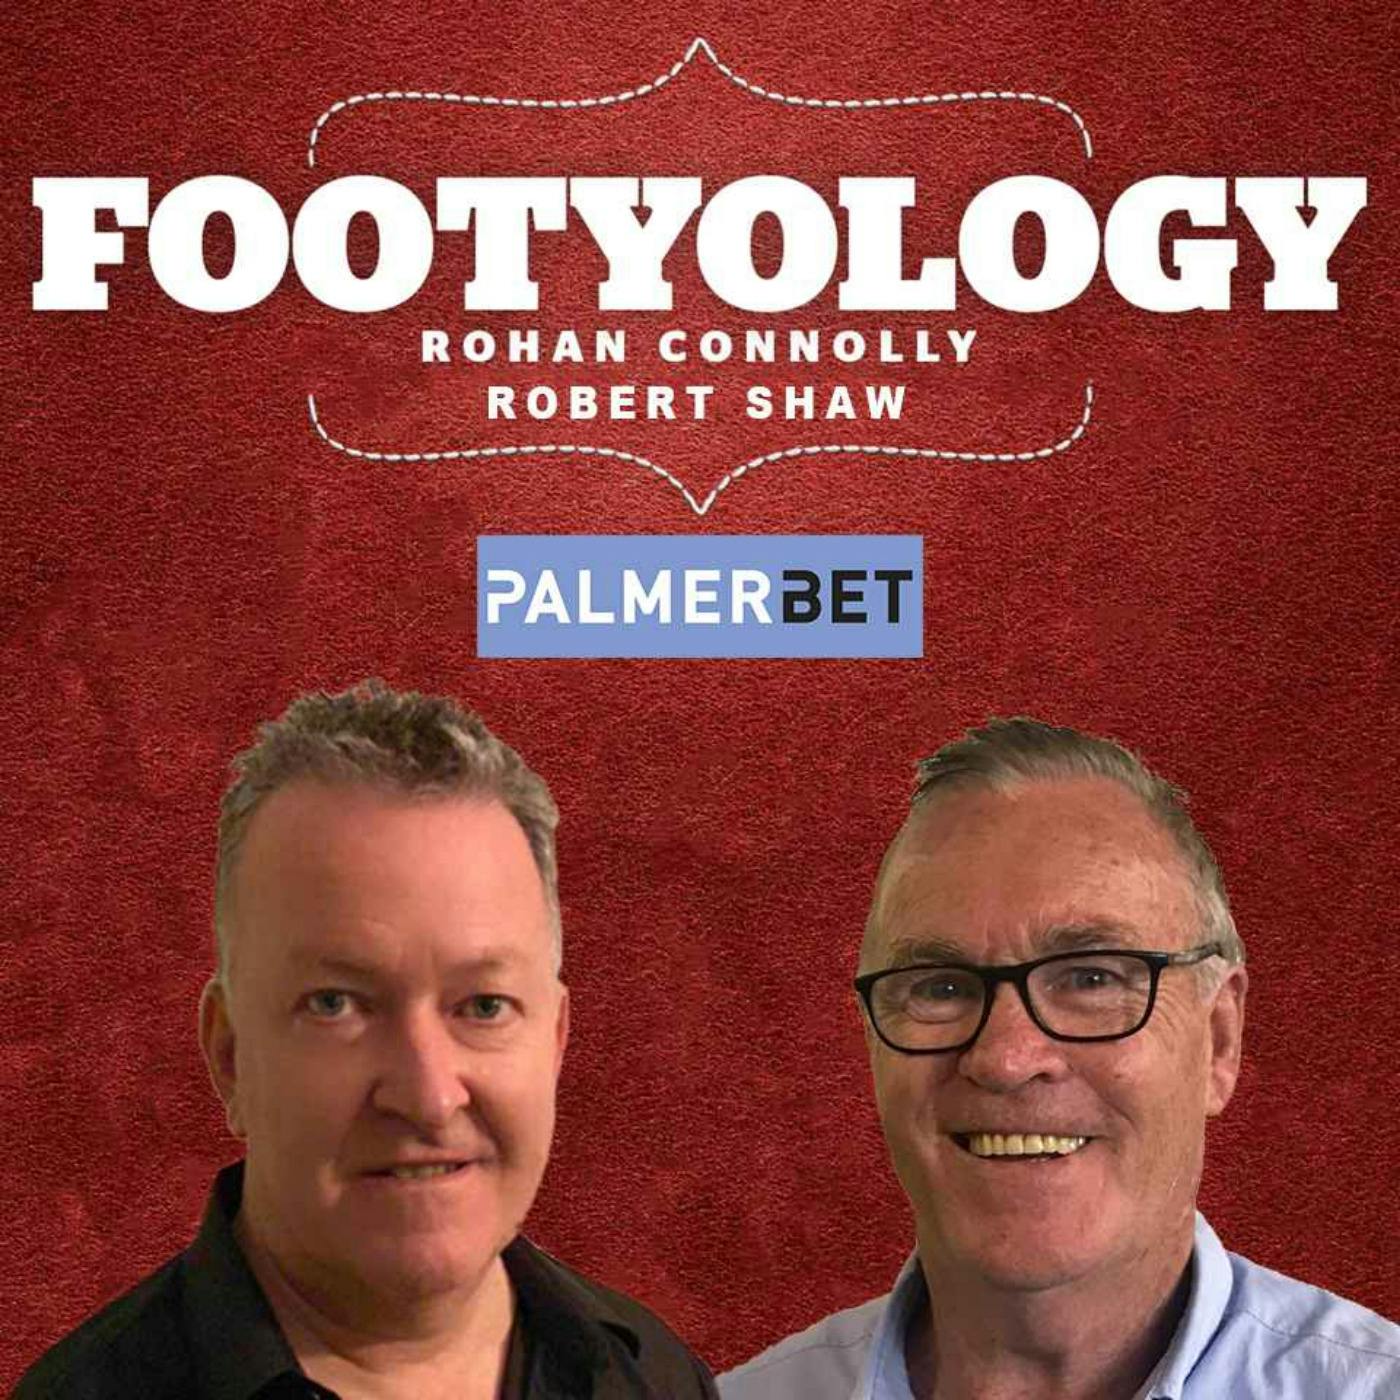 Footyology Podcast - September 14th 2022